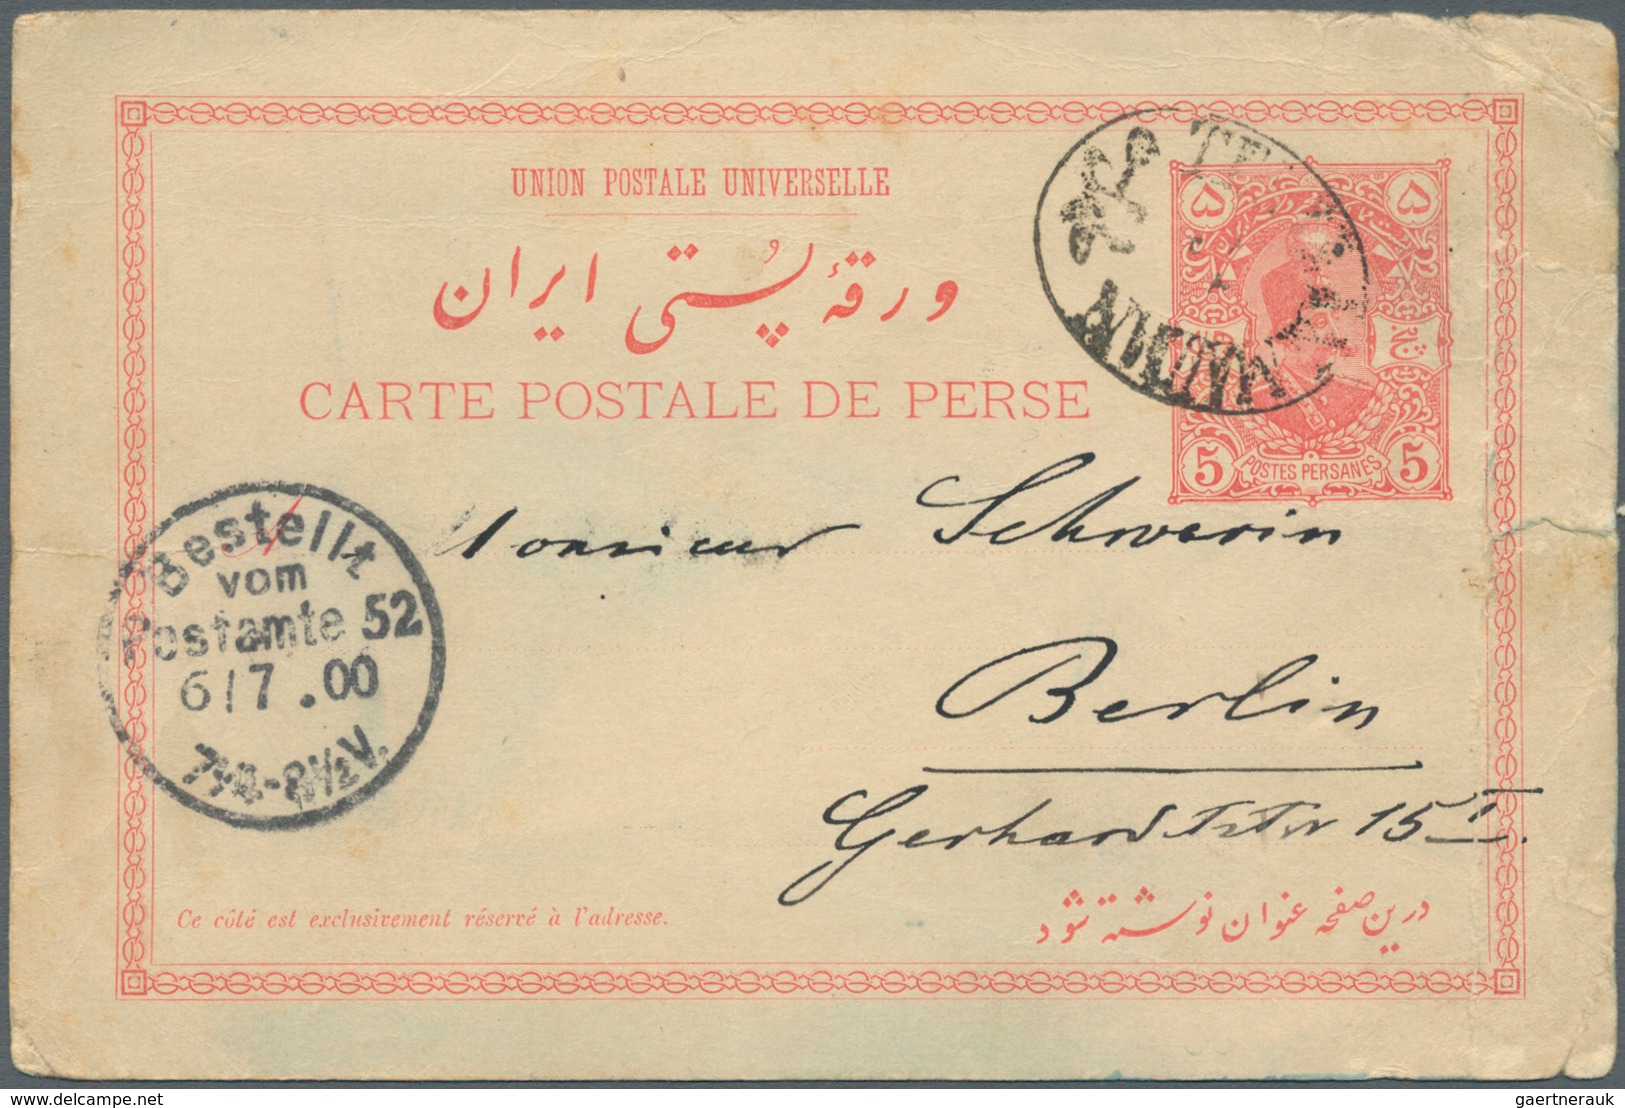 22813 Iran: 1891/1908, group of nine entires (covers, ppc and used stationeries with comprehensive message